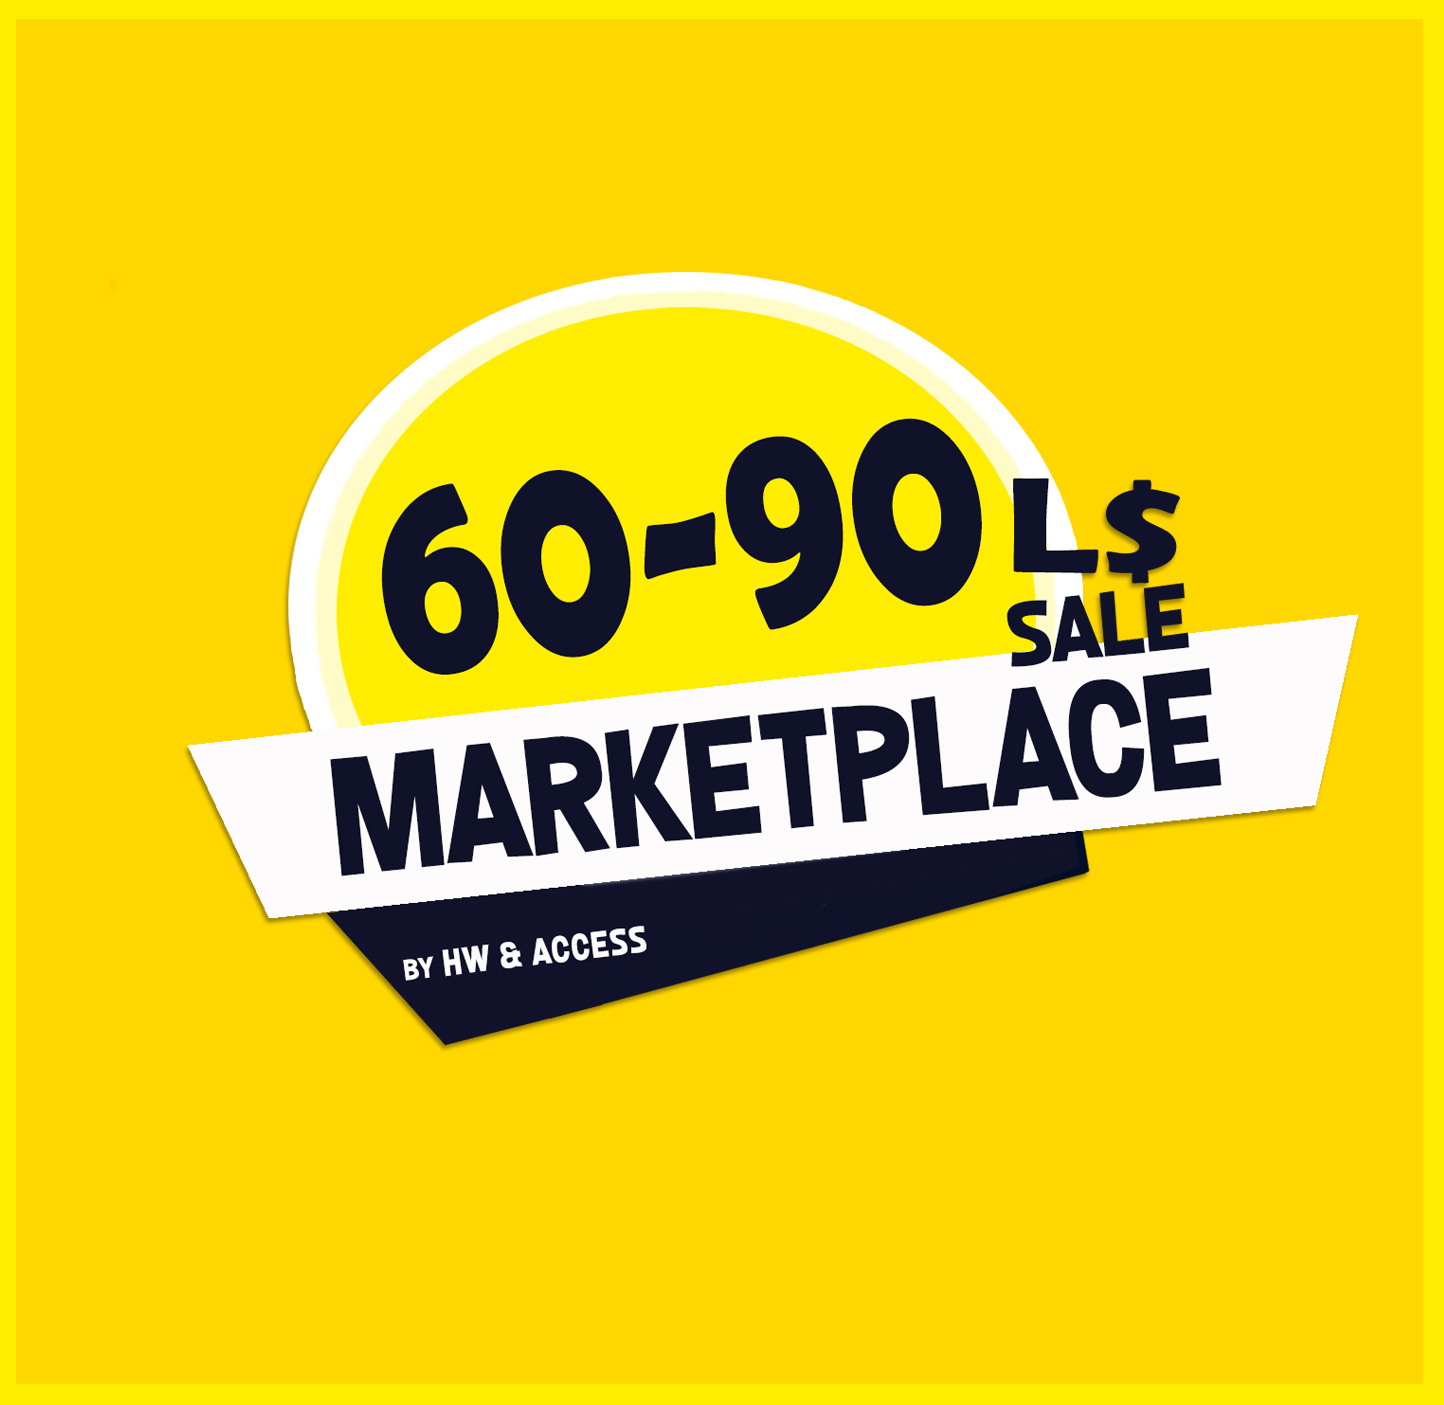 WE ARE STOKED FOR THE 60-90L$ MARKETPLACE SALE BY HW!